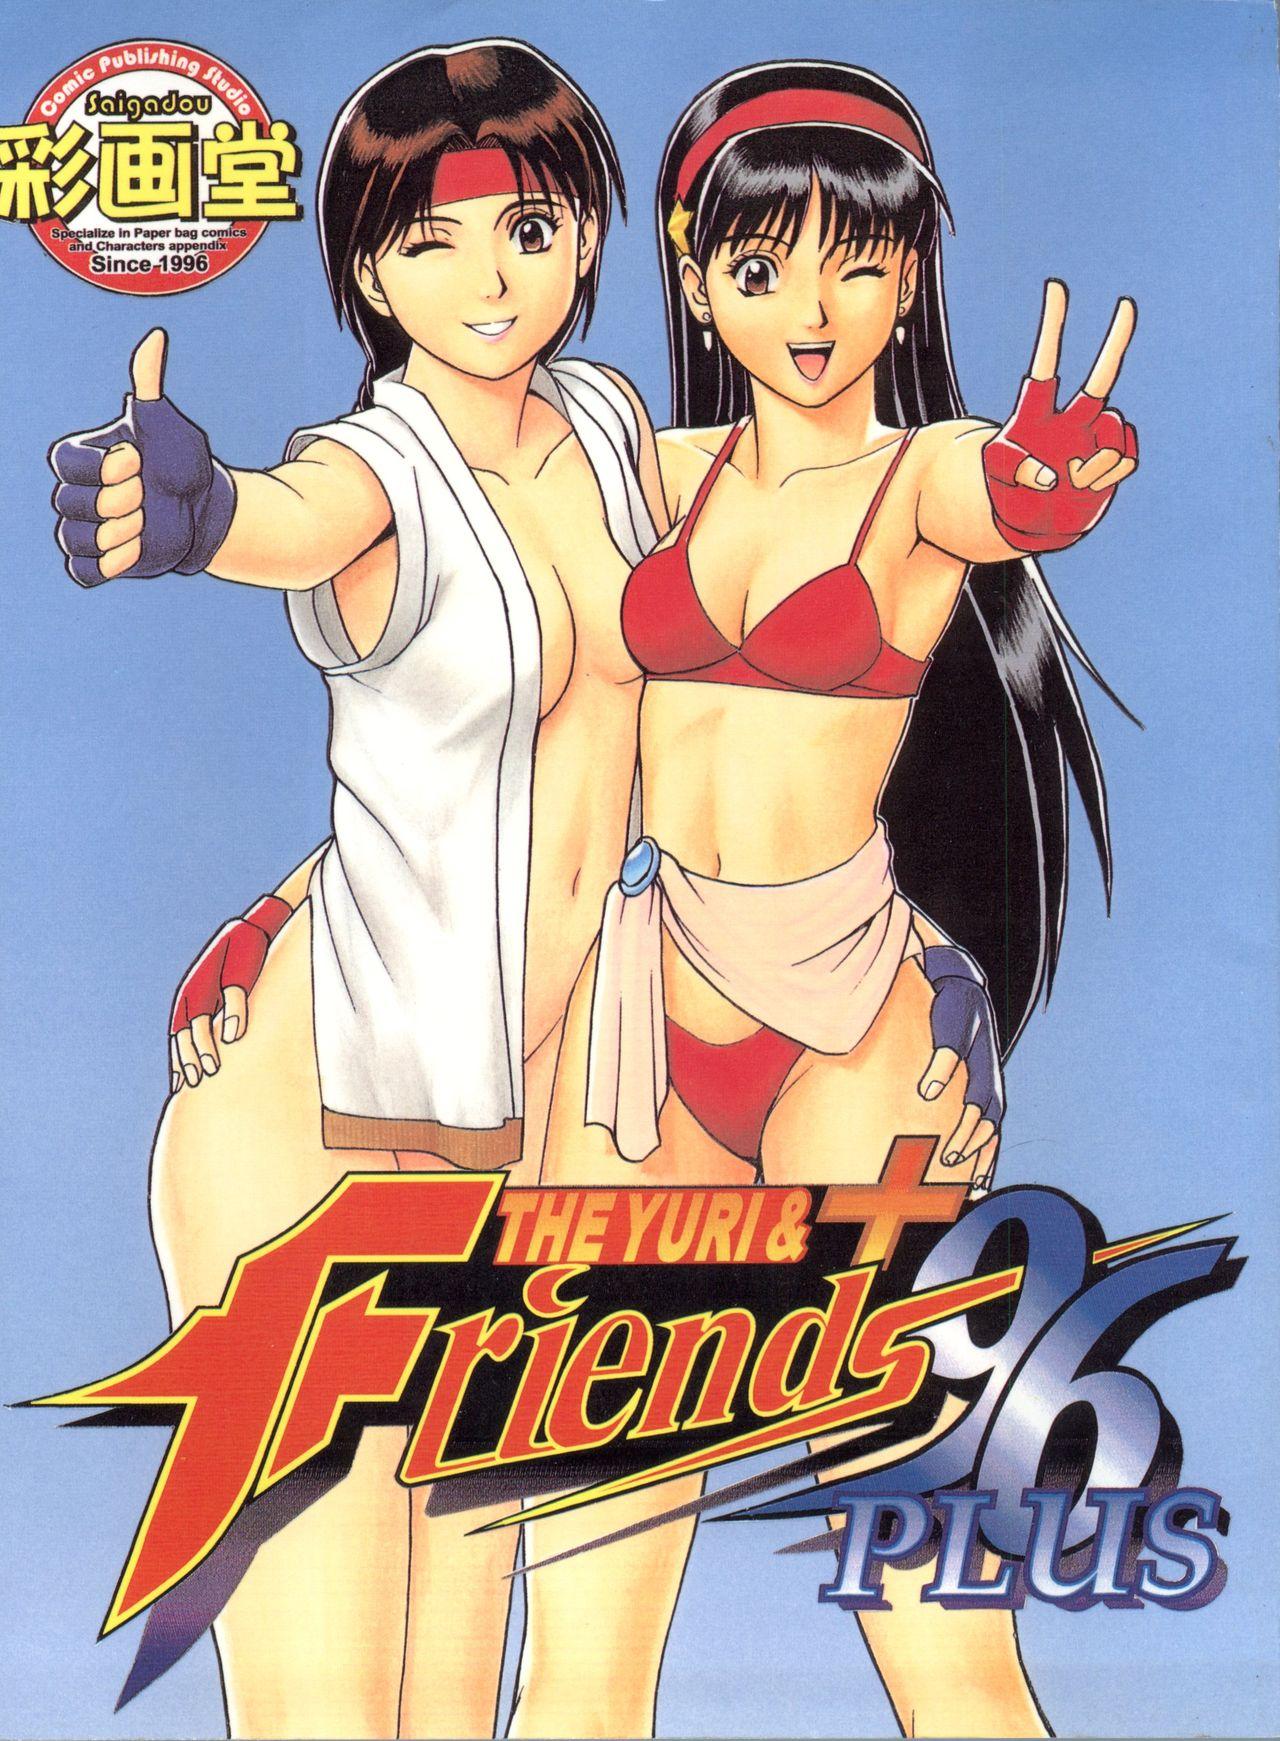 Camsex The Yuri&Friends '96 Plus - King of fighters Tittyfuck - Picture 1